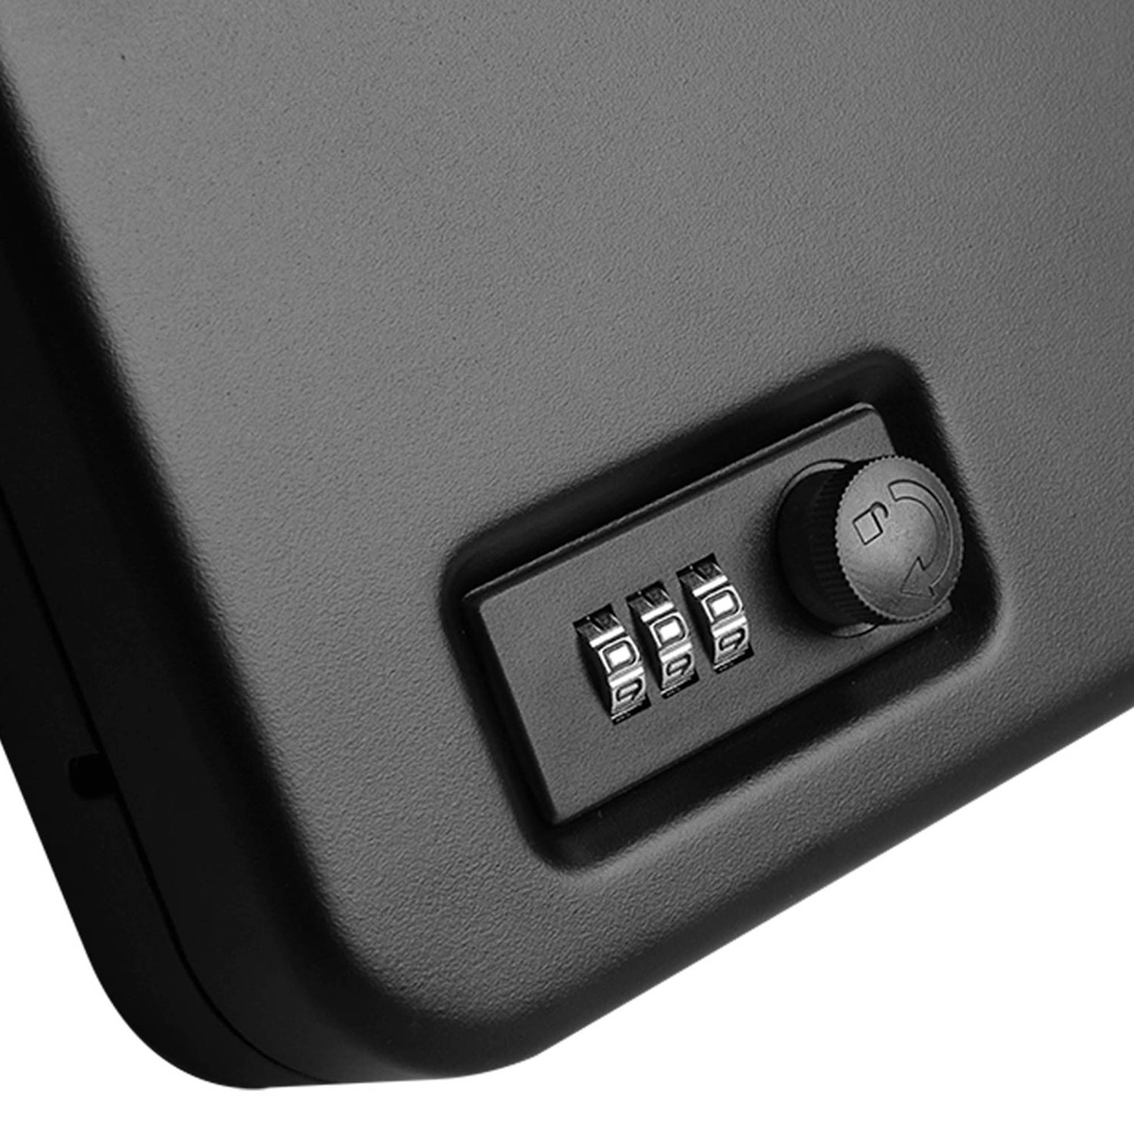 Fortress Portable Safe with Key Lock - Image 6 of 7